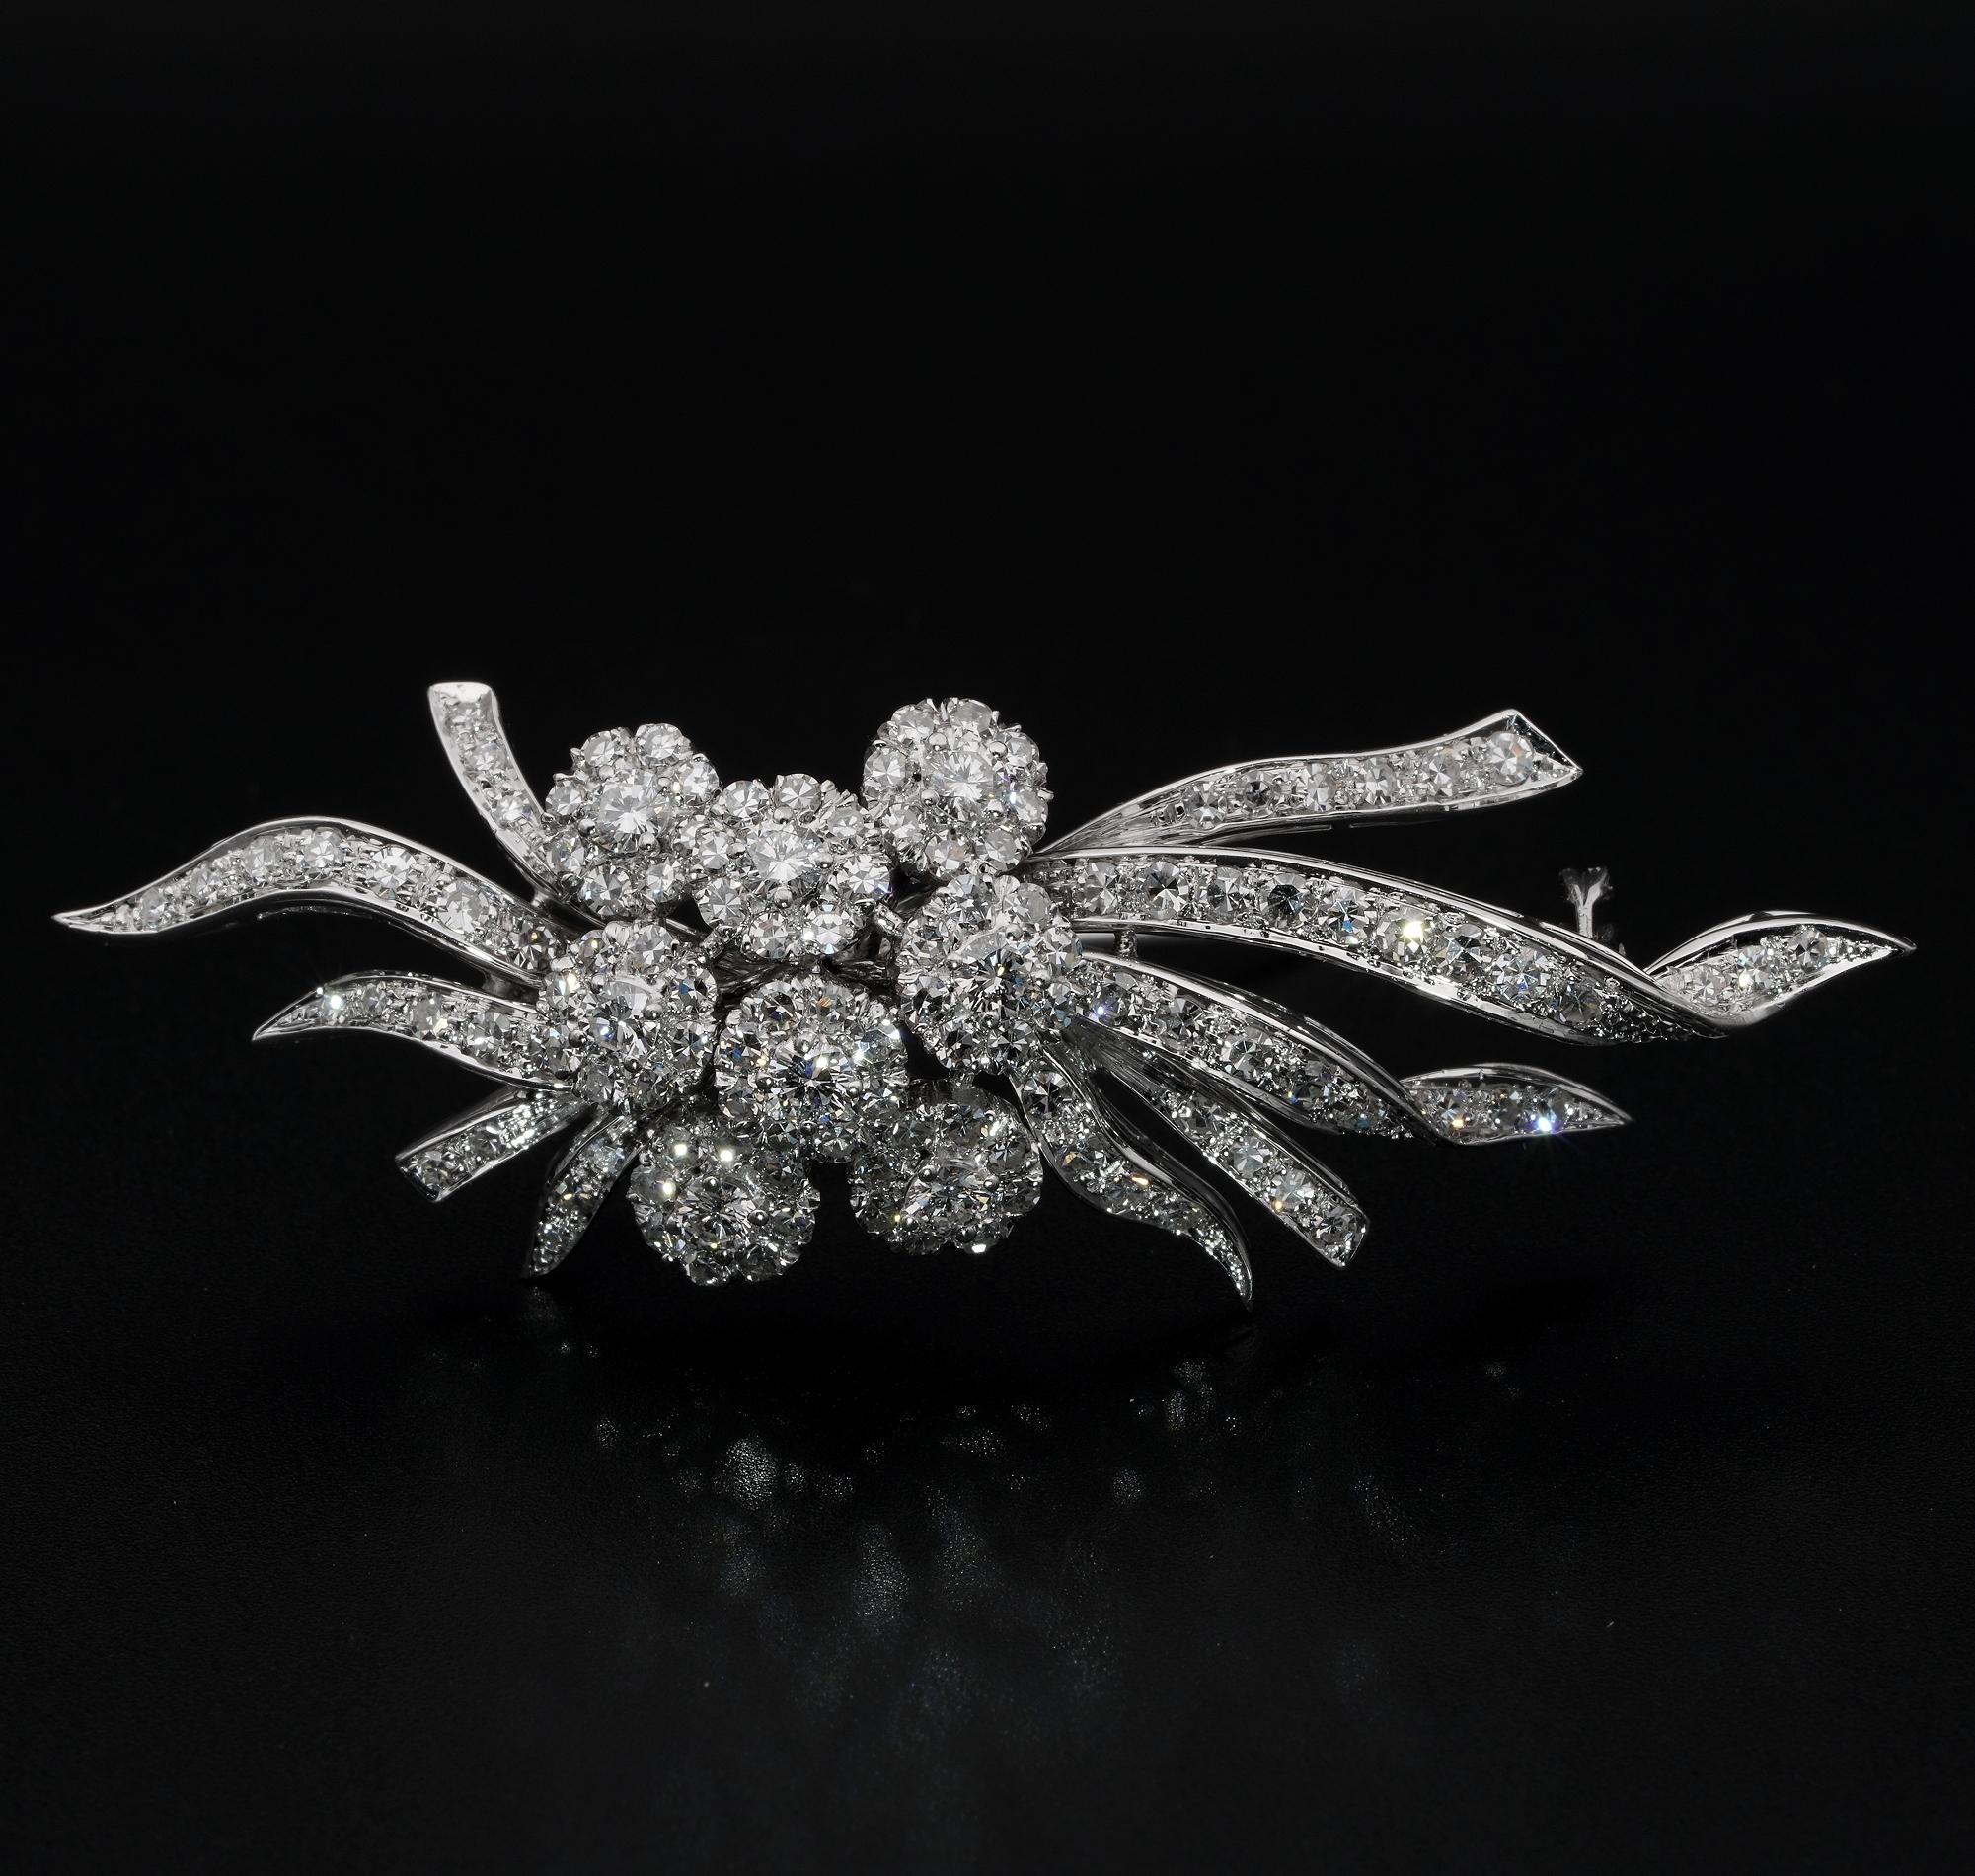 Epitome of Elegance

This outstanding mid century brooch is best example of the tasteful glamour design of the period
Superbly hand created of solid 18 KT white gold, truly exquisite in details -assay and maker marks
Consists of a remarkable rich